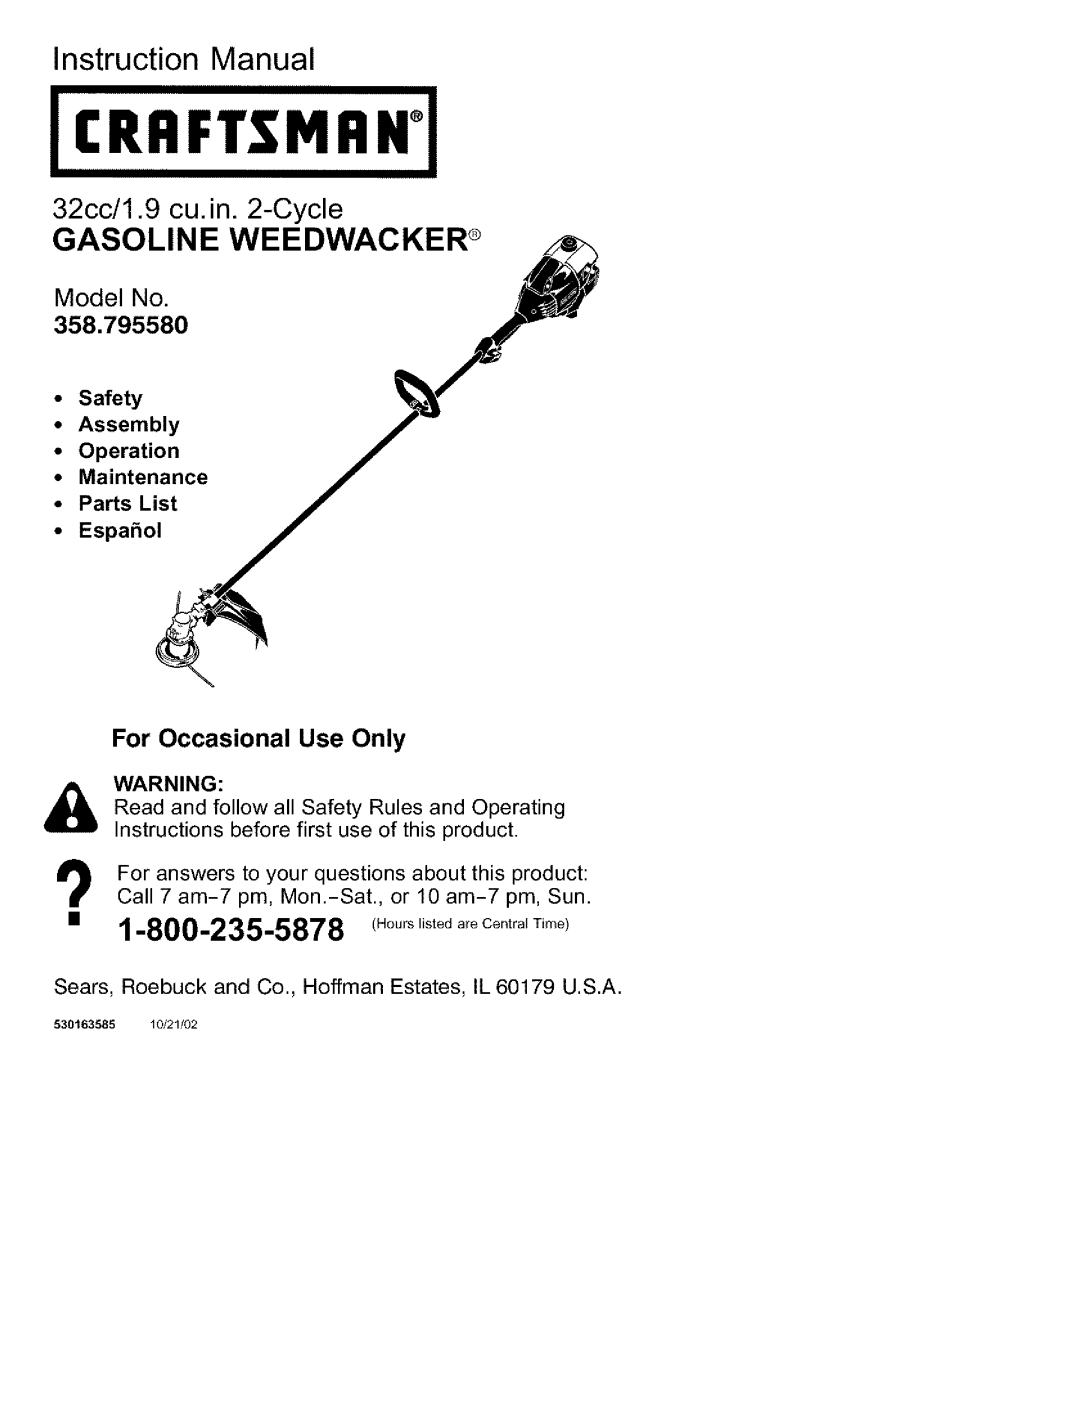 Craftsman instruction manual Model No, 32cc/1.9 cu.in. 2-Cycle GASOLINE WEEDWACKER, 358.795580, For Occasional Use Only 